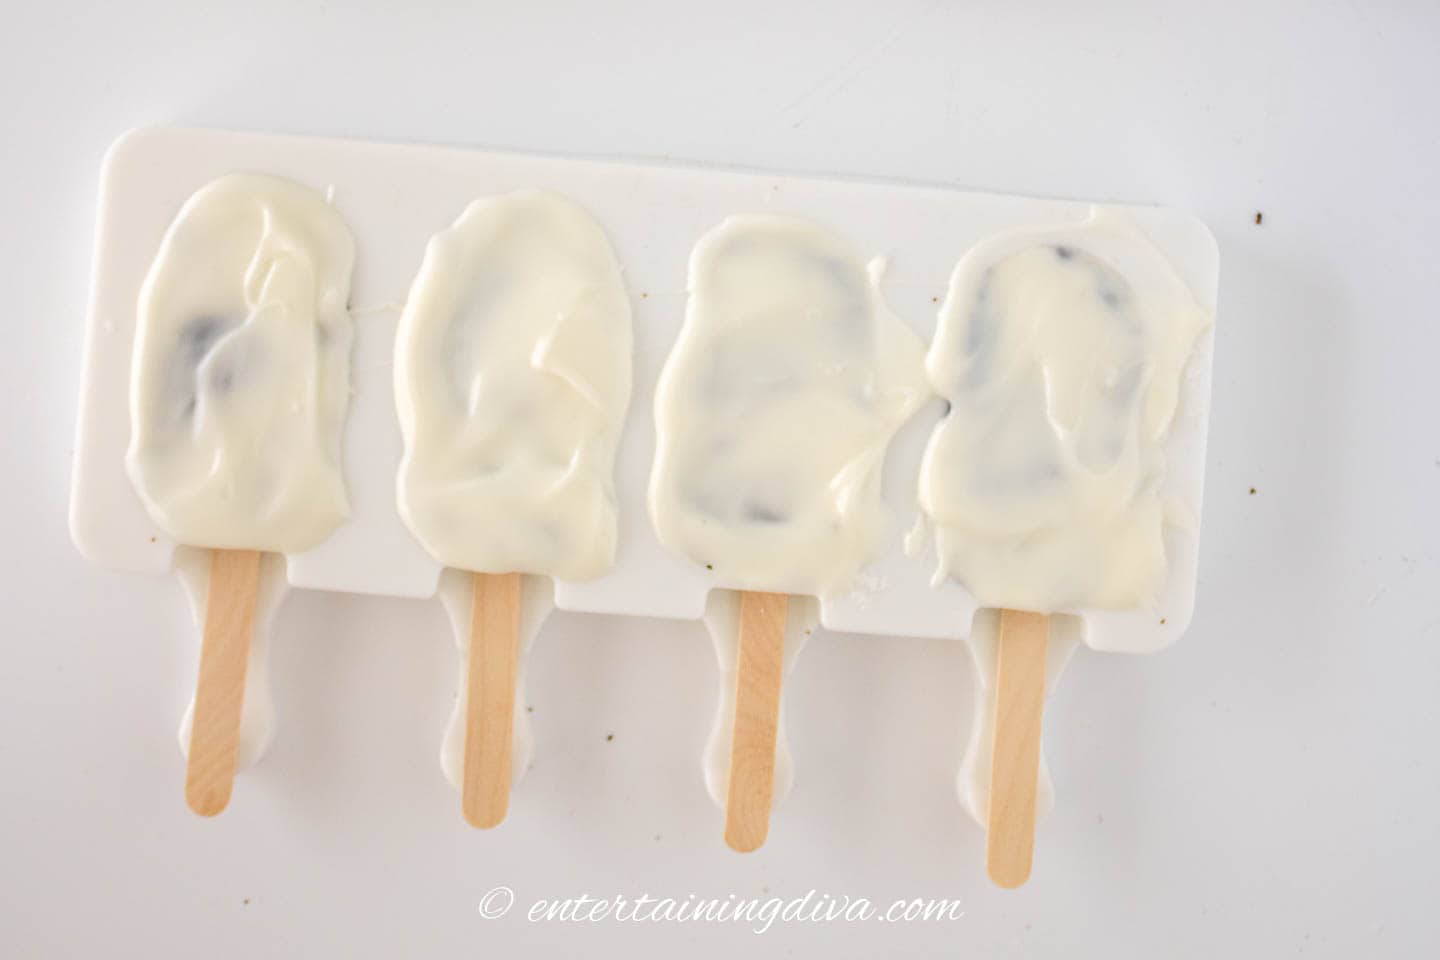 White chocolate coating on top of the cakesicle